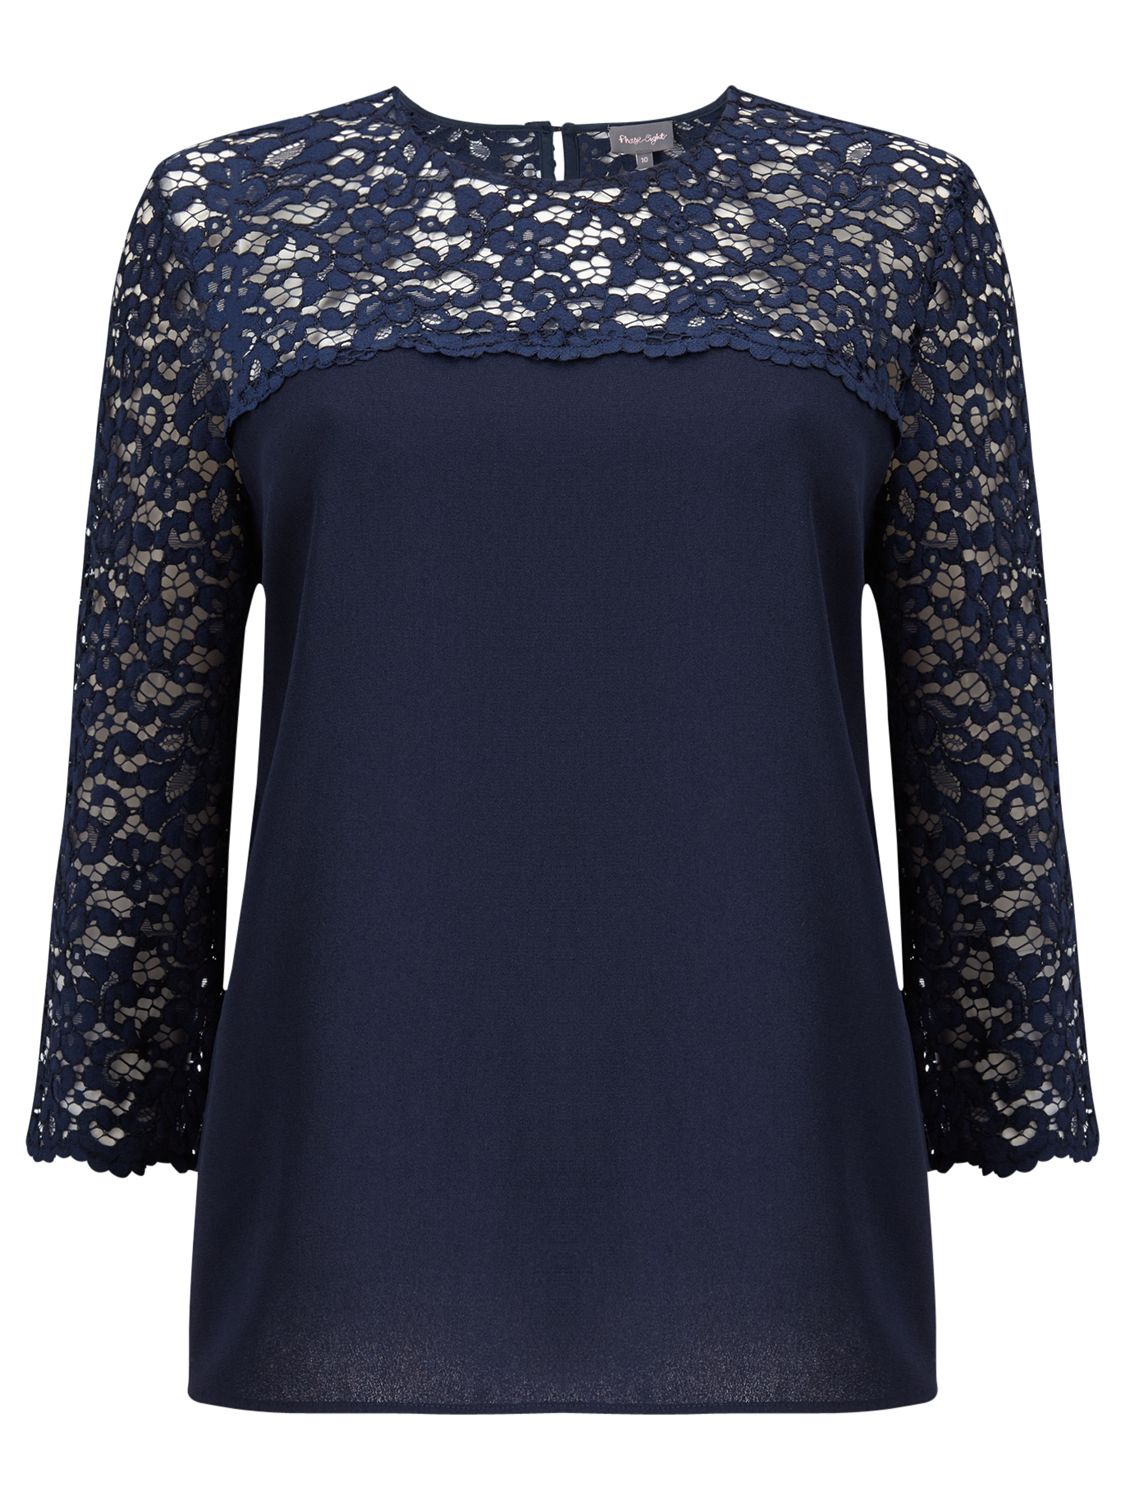 Phase Eight Lowri Long Sleeve Lace Blouse, Navy at John Lewis